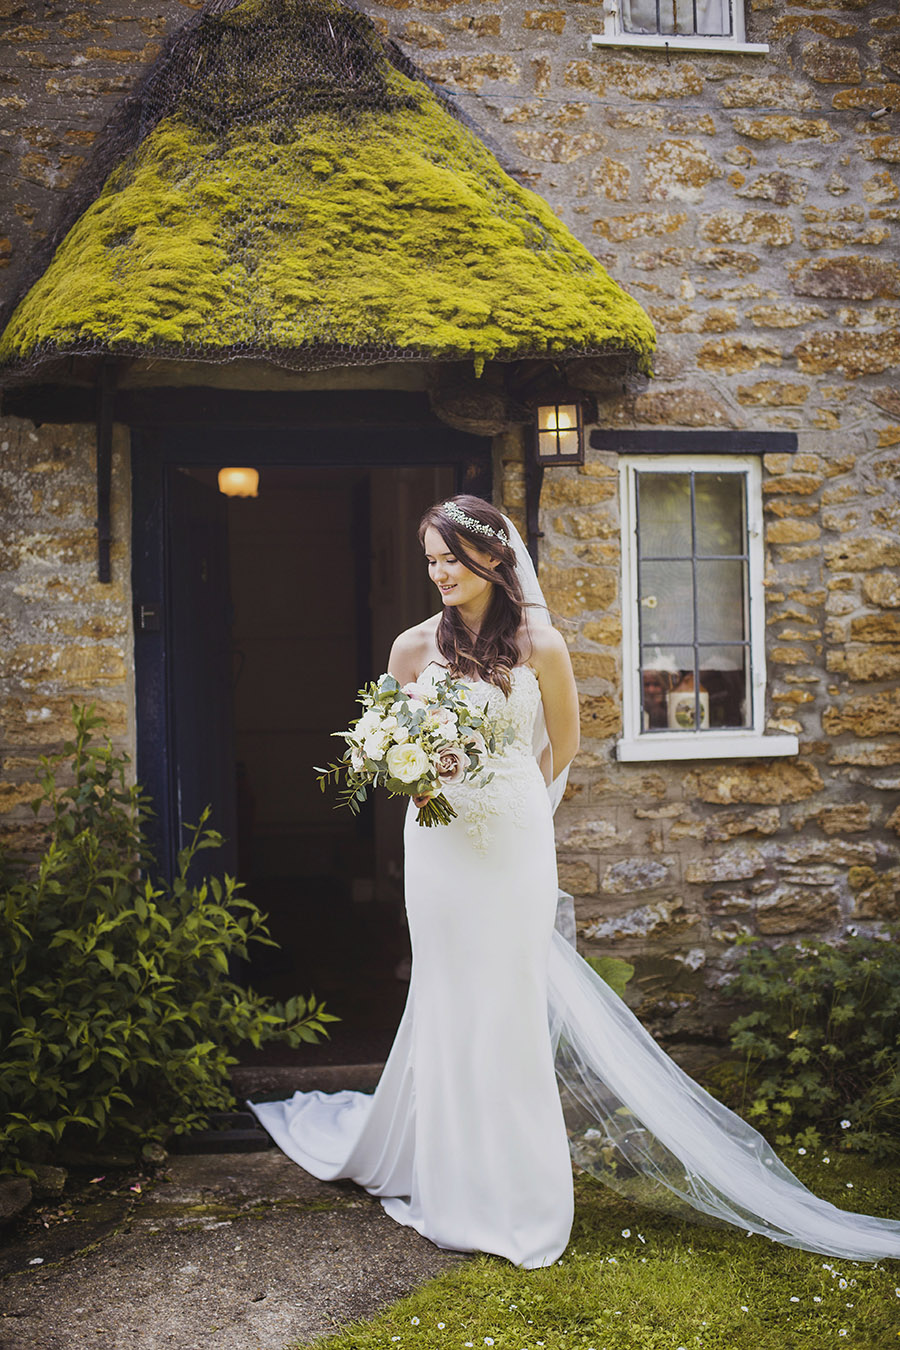 Relaxed outdoor wedding at Cott Farm Barn with images by Heather Birnie Photography on the English Wedding Blog (7)